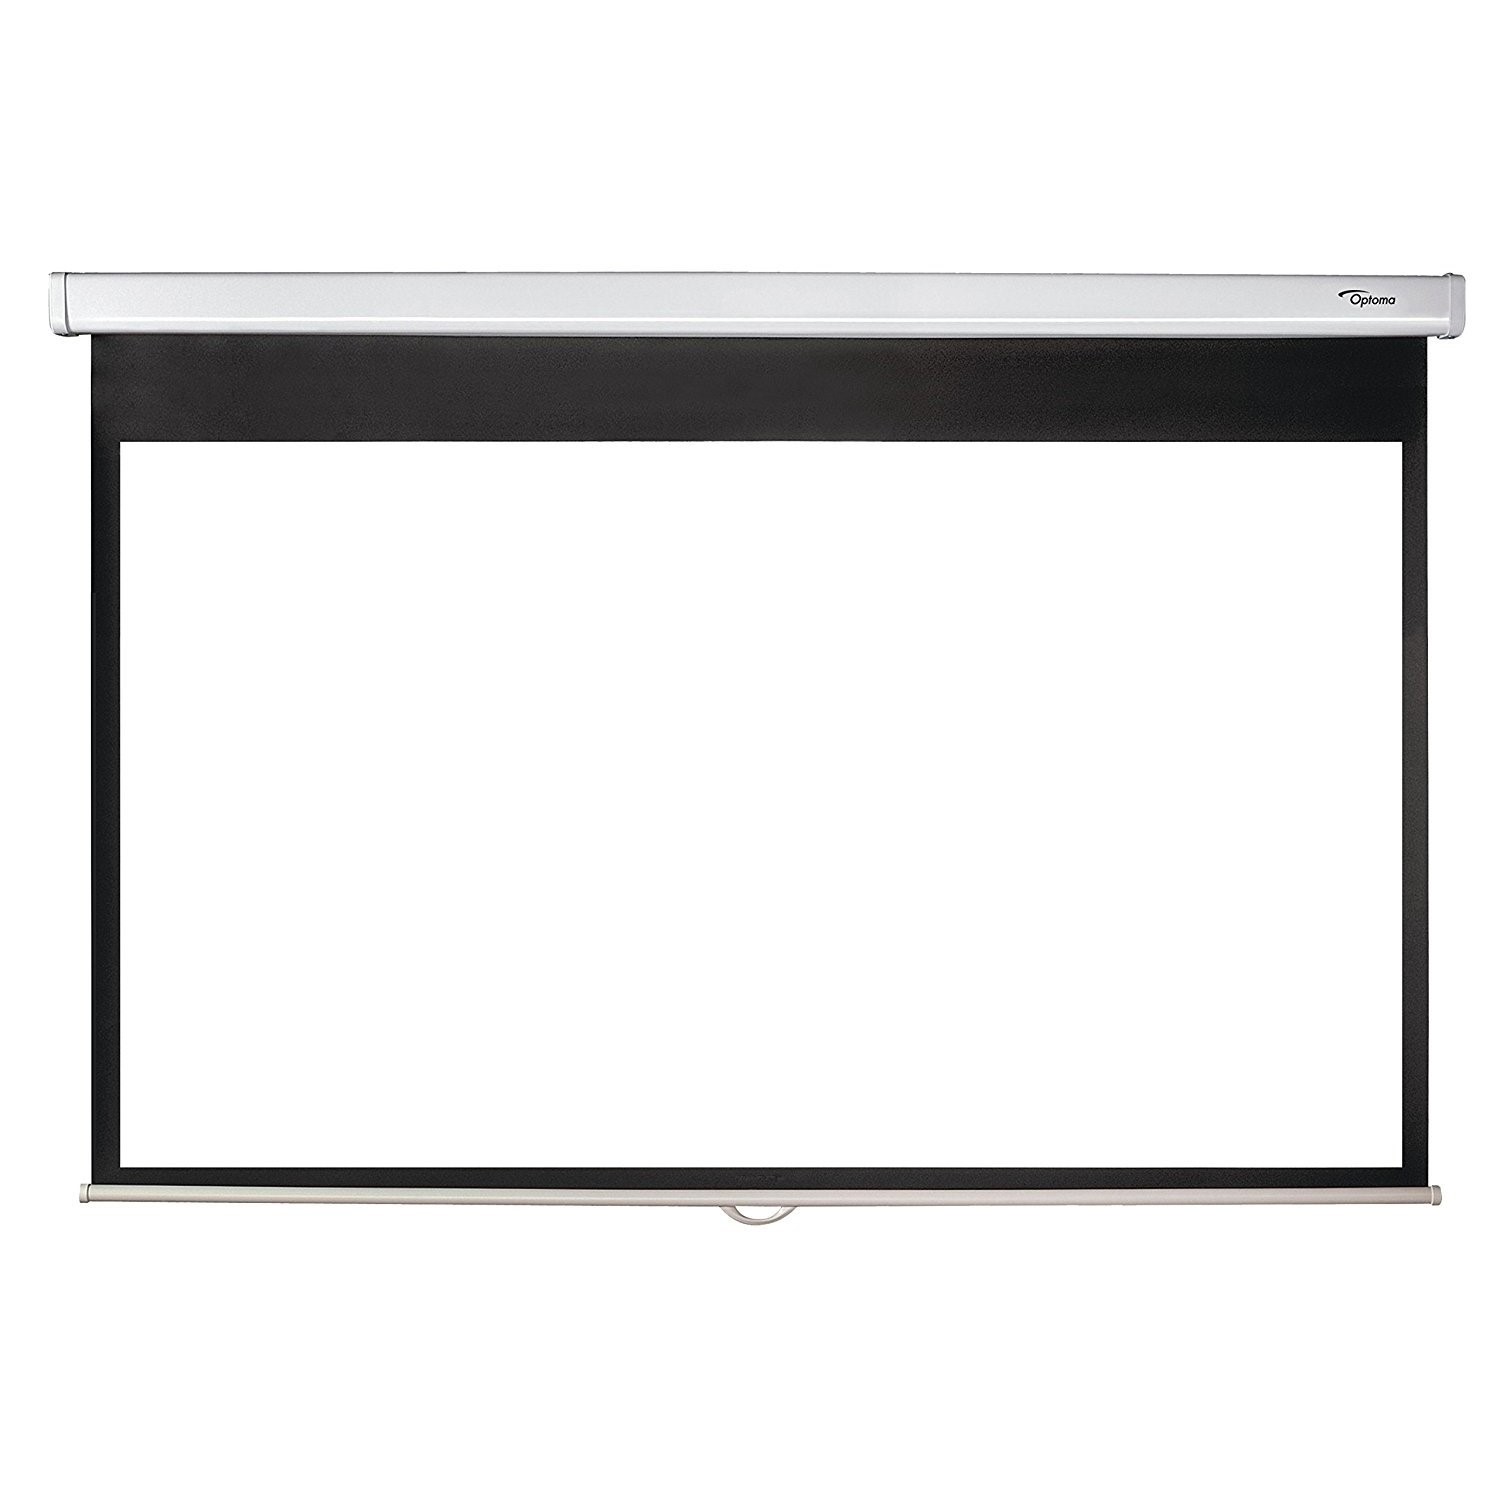 Optoma 92 Pull Down Projector Screen DS-9092PWC